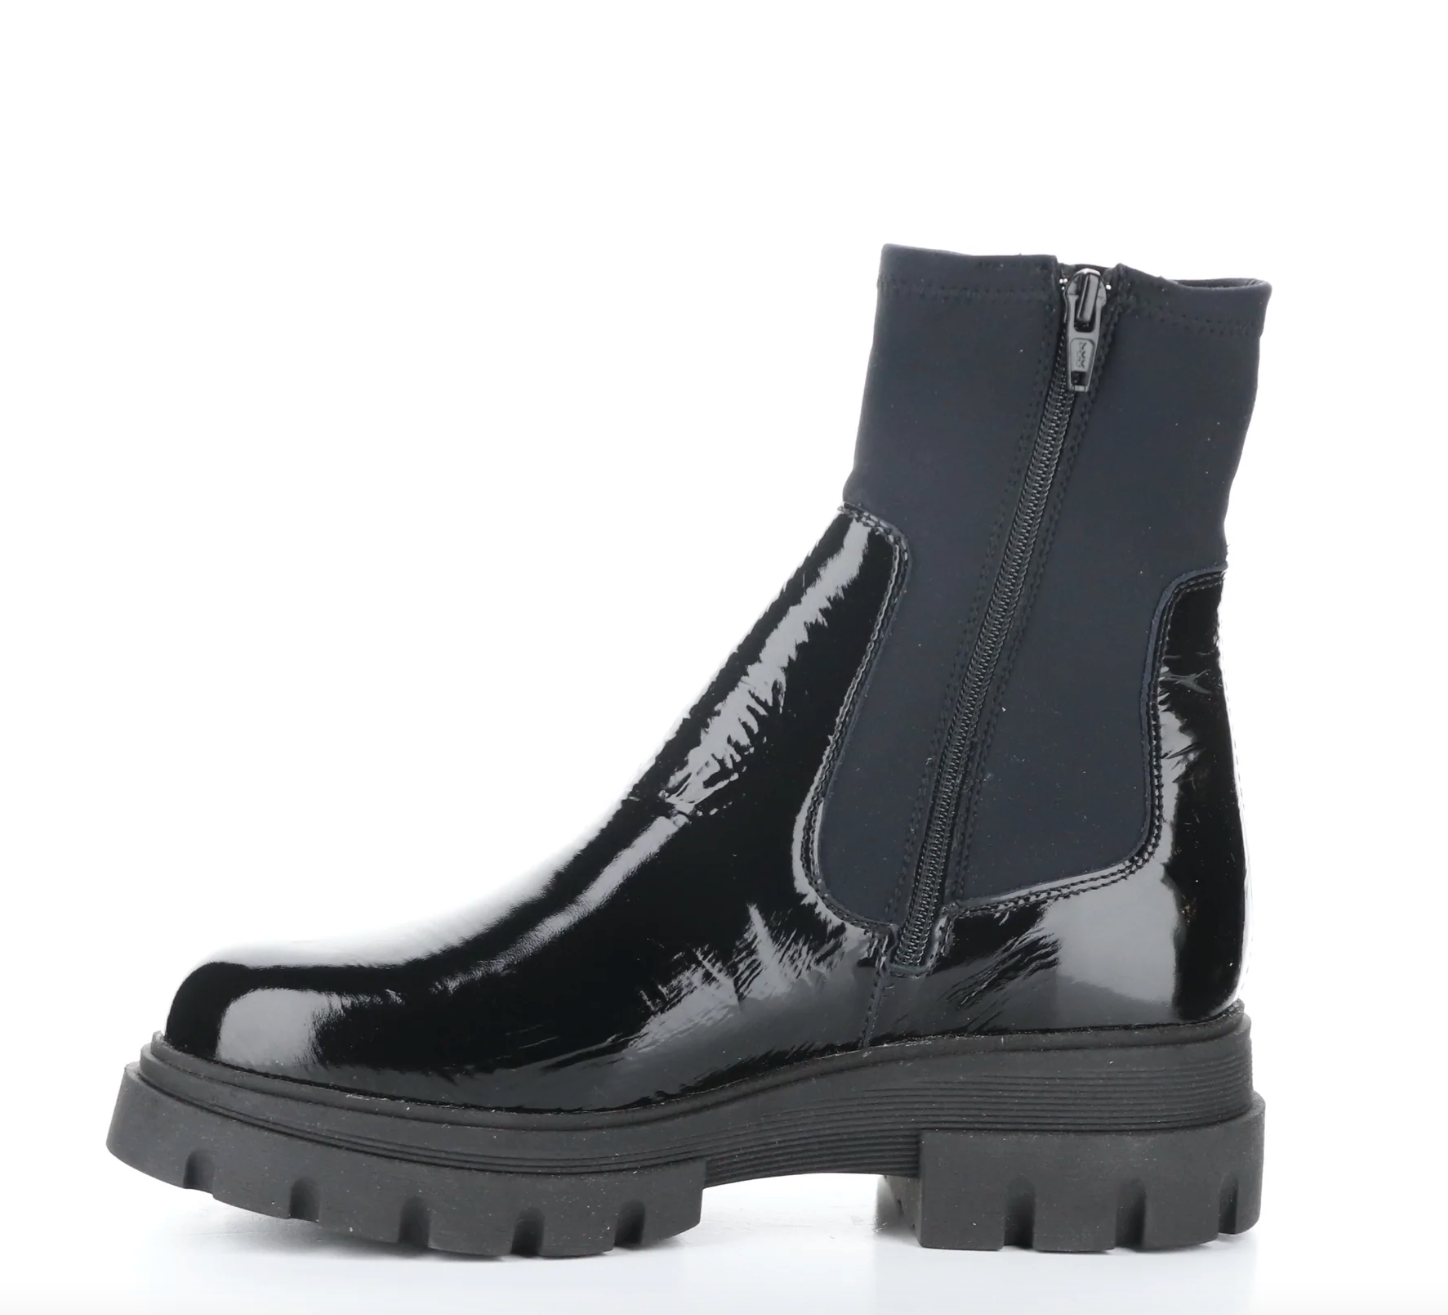 Bos&Co. "Five" Black Patent - Ankle Boot